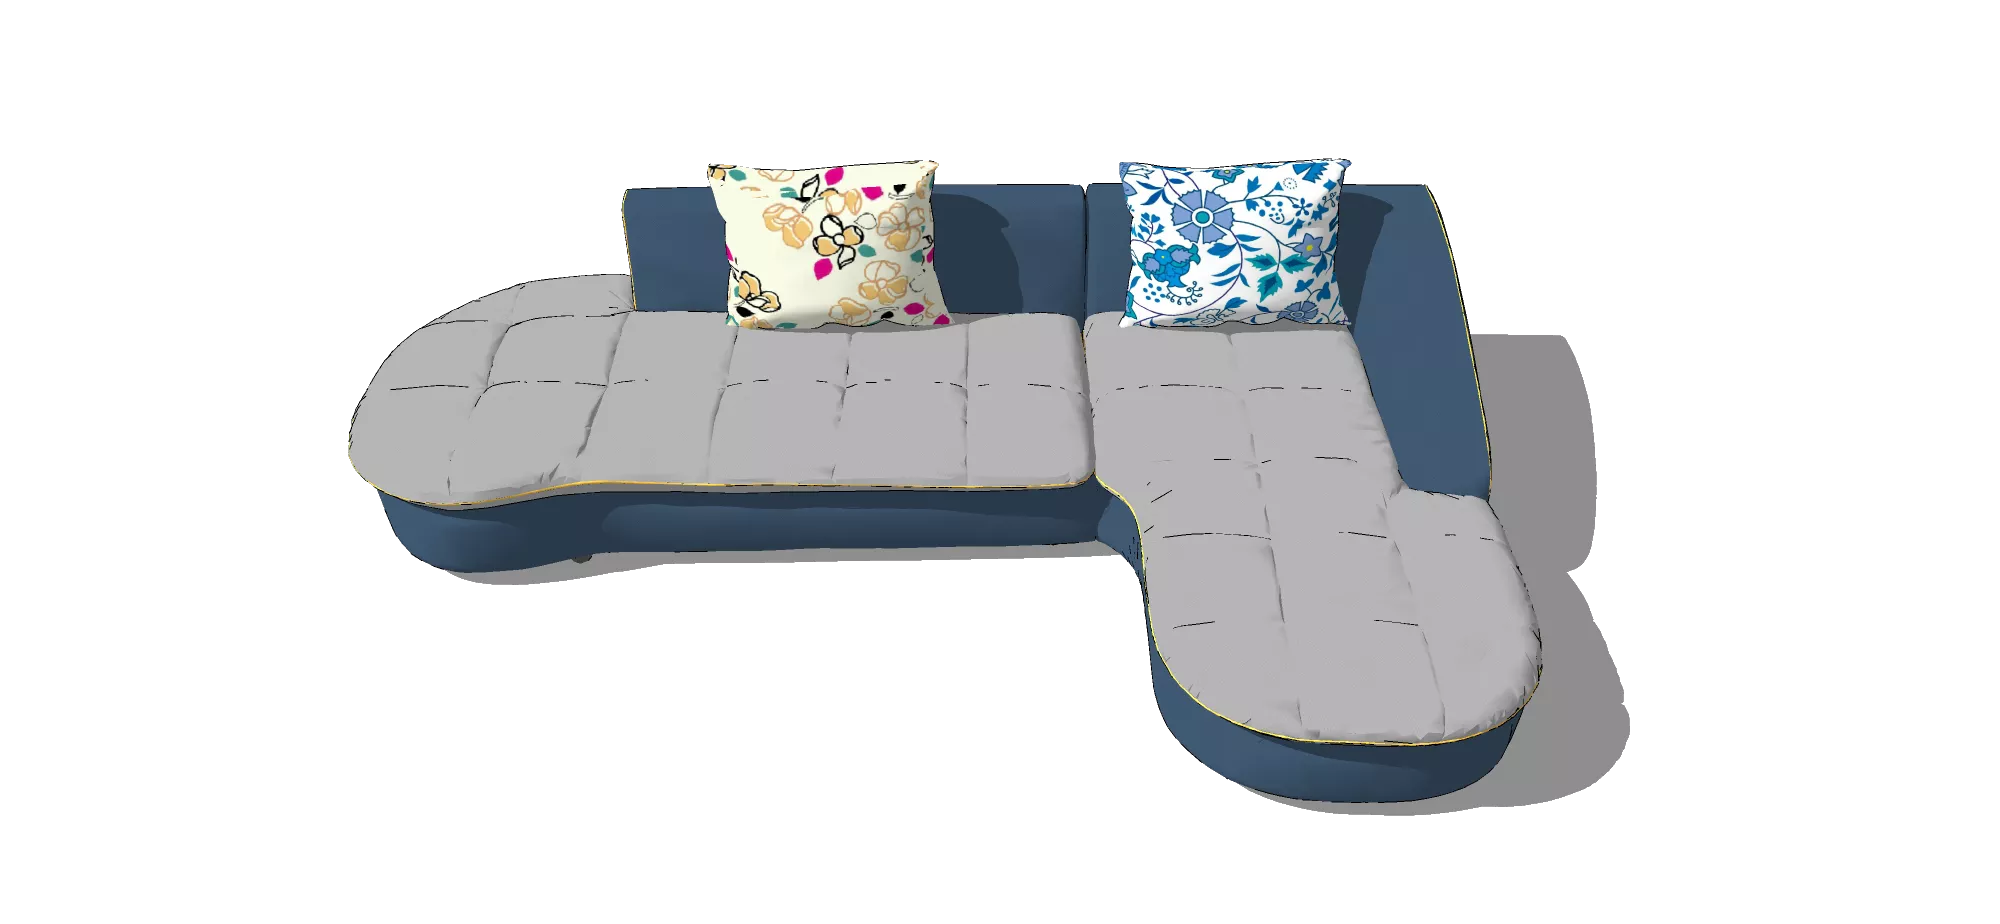 MODERN SOFA - SKETCHUP 3D MODEL - VRAY OR ENSCAPE - ID13072